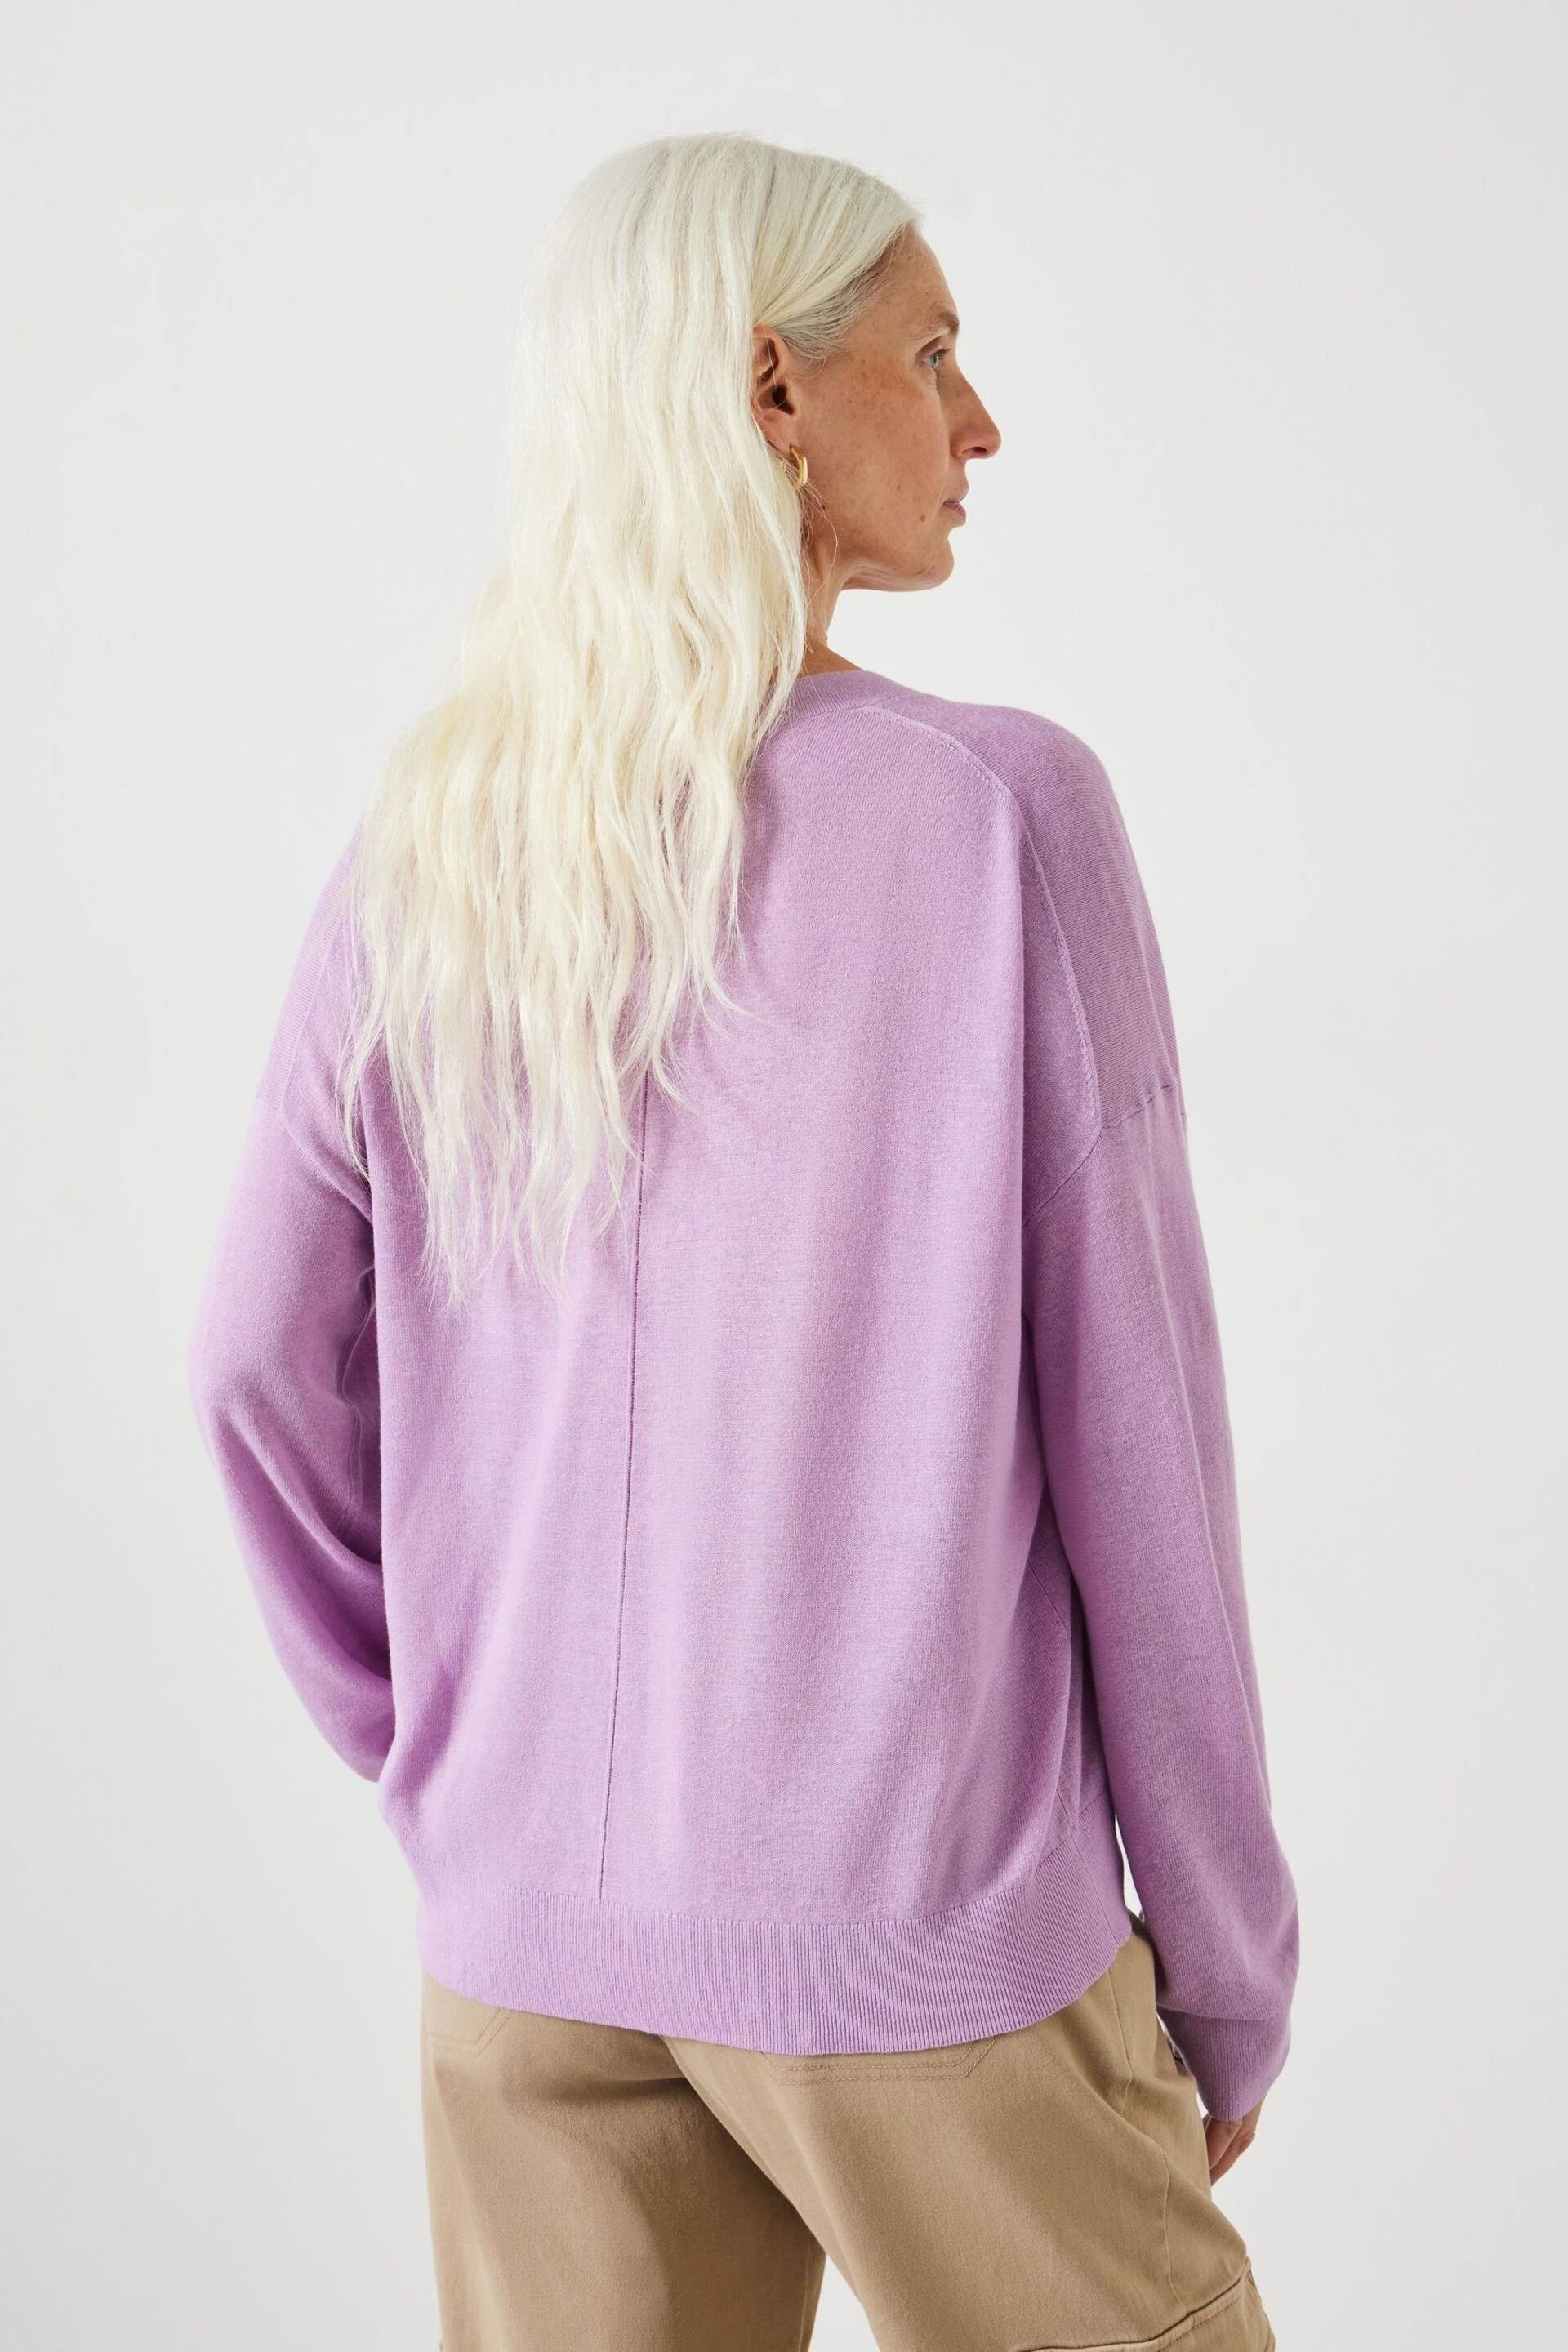 Hush Purple Aston Linen Blend Knitted Top - Image 2 of 5